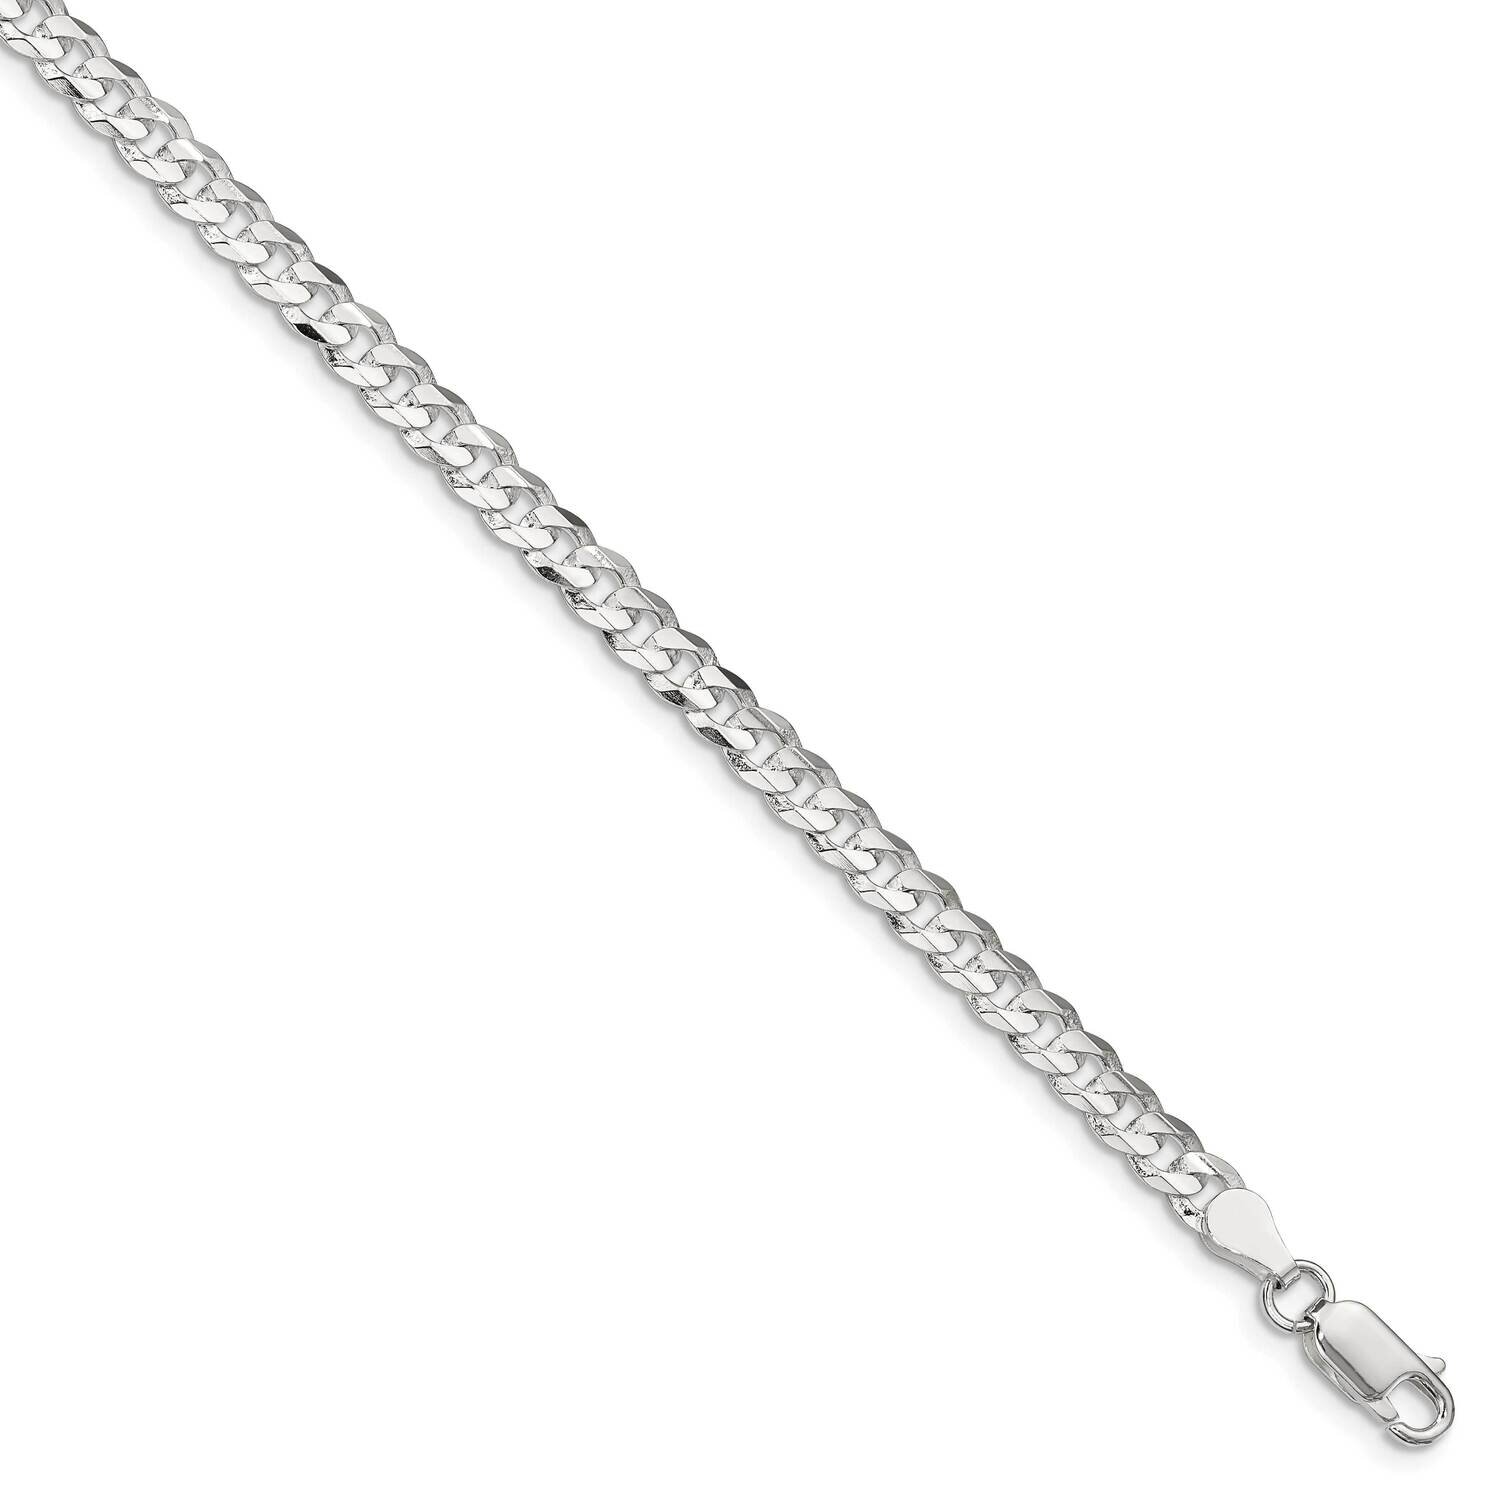 4.5mm Concave Beveled Curb Chain 26 Inch Sterling Silver QCBC120-26